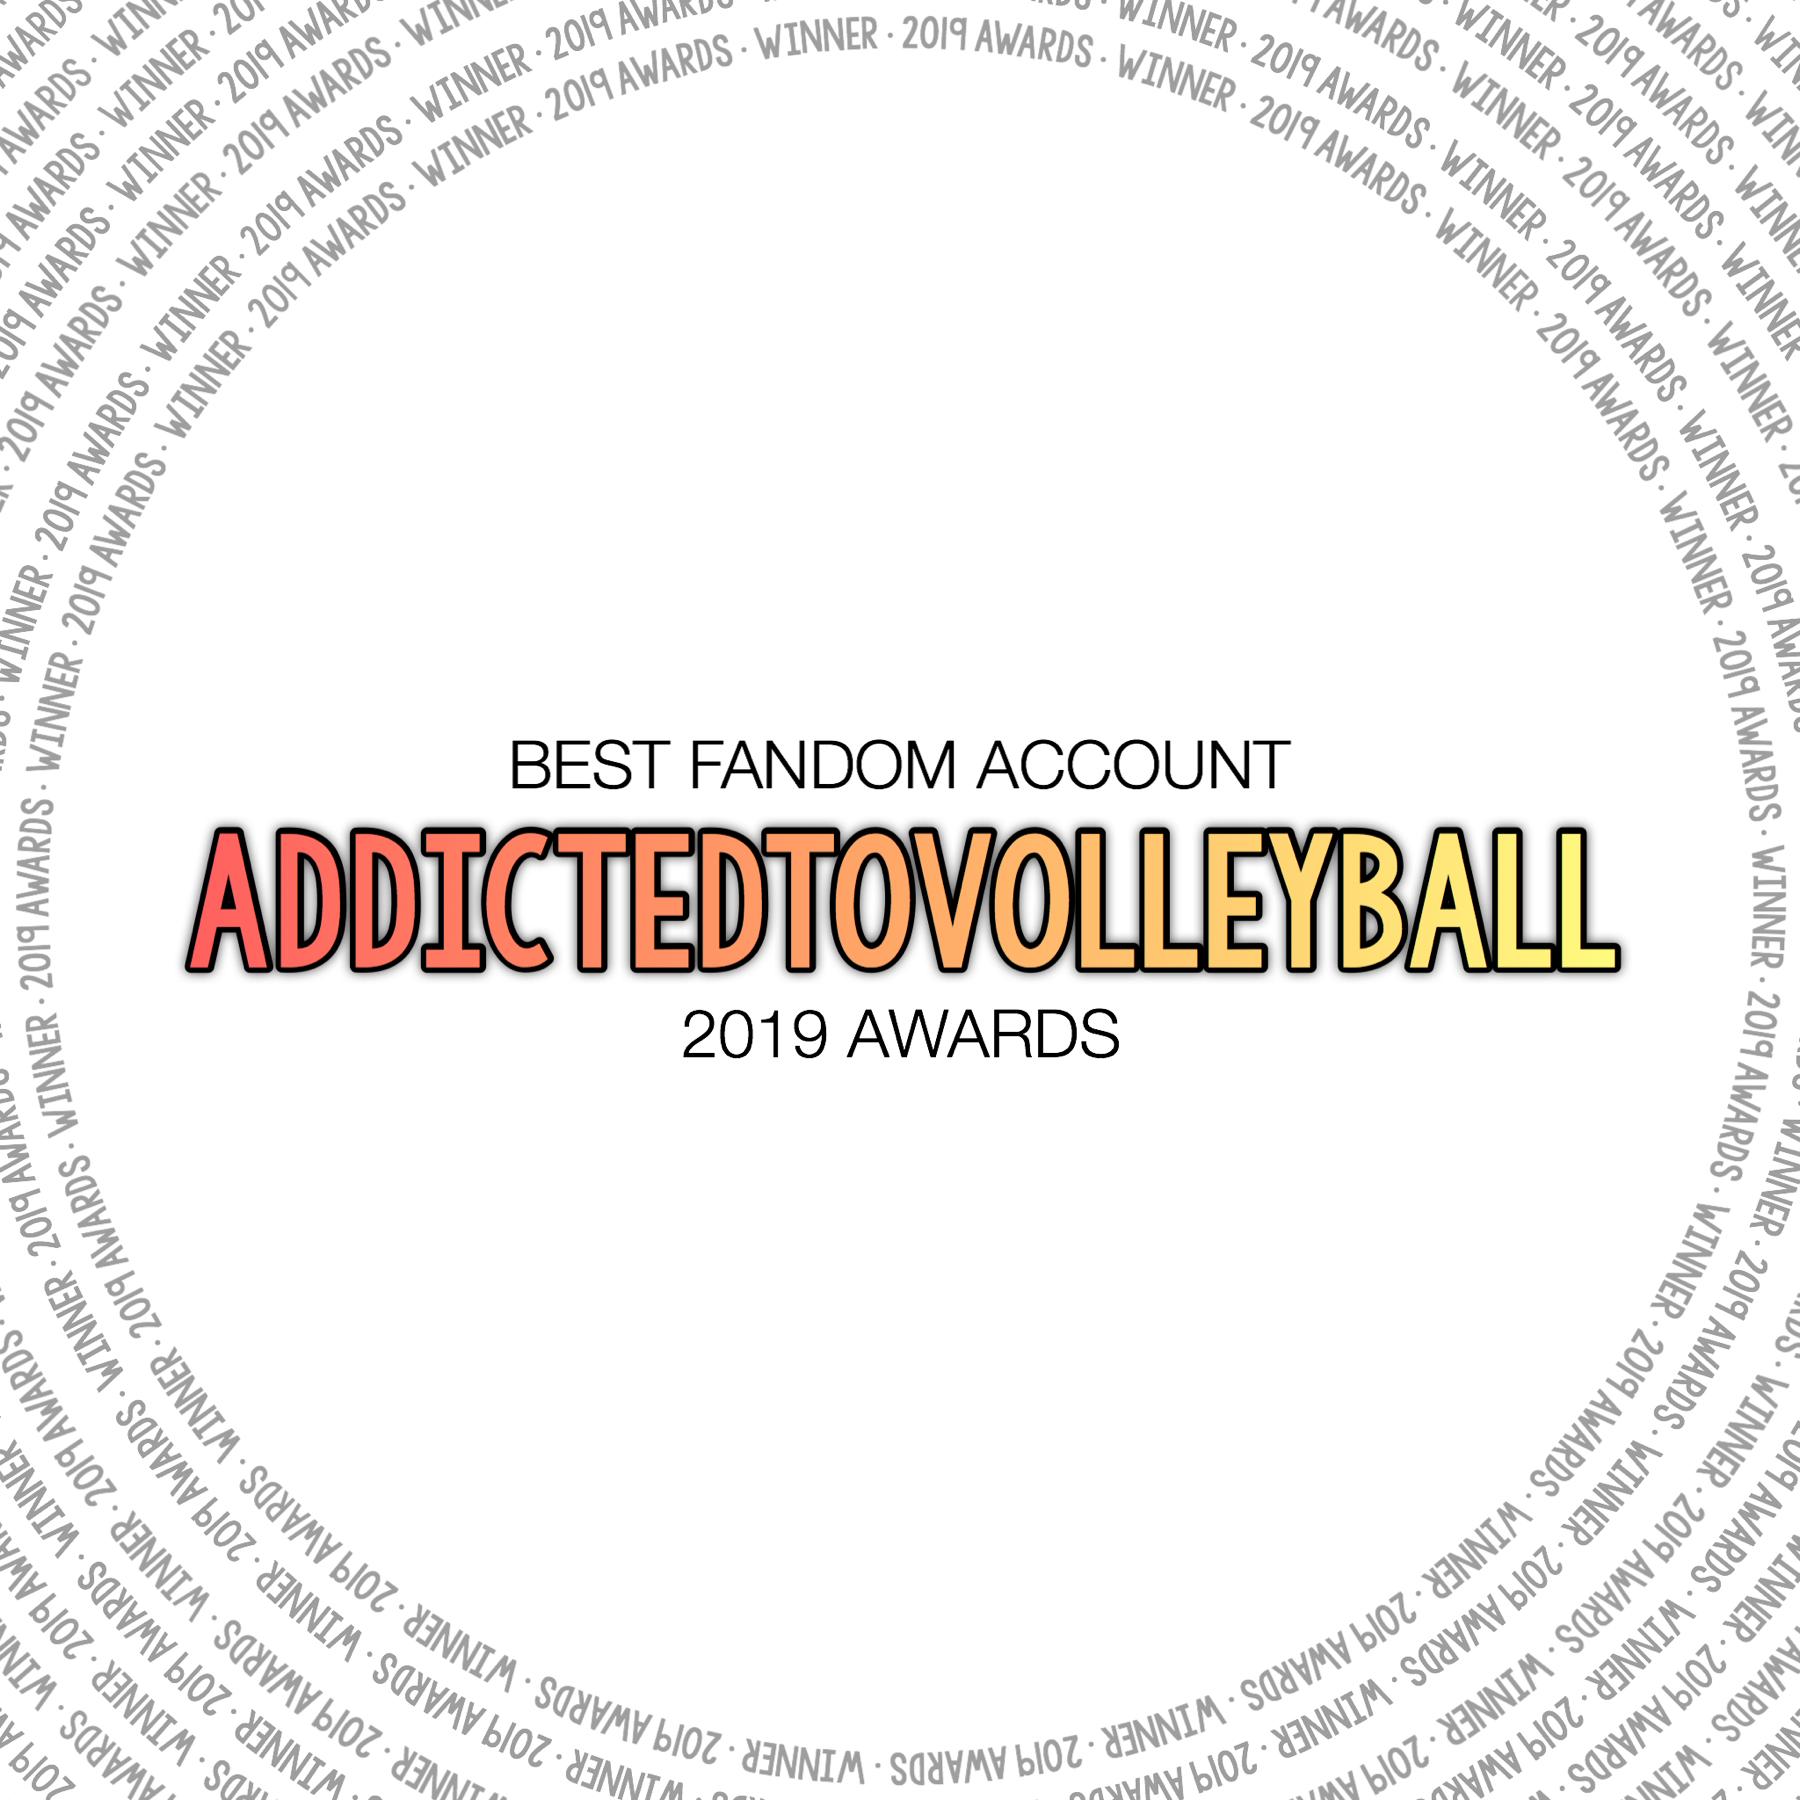 Congratulations @addictedtovolleyball!

The vote count will be in the remixes